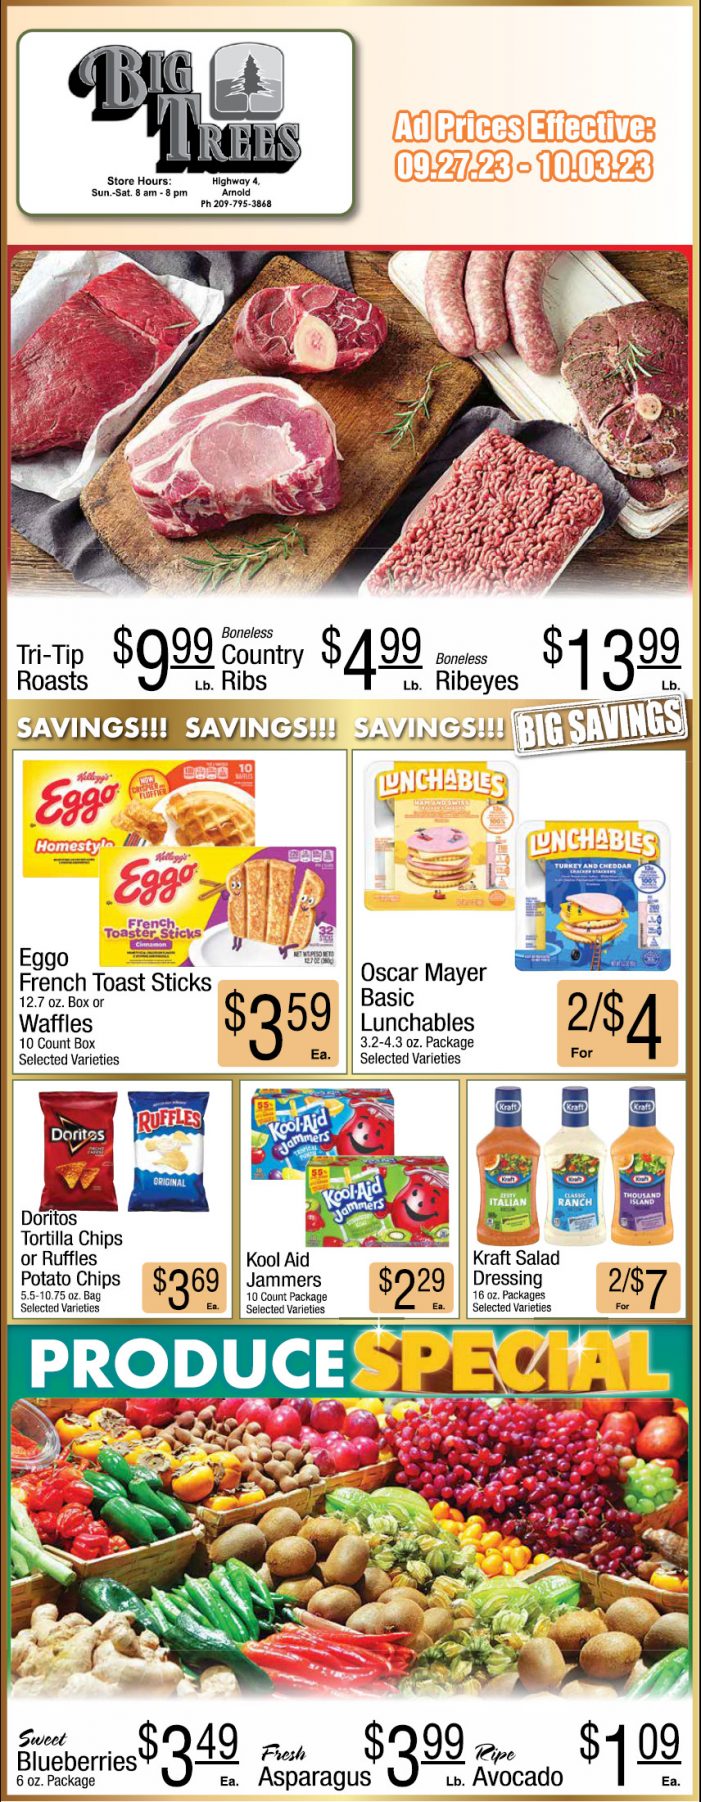 Big Trees Market Weekly Ad, Grocery, Produce, Meat & Deli Specials Through October 3rd!  Shop Local & Save!